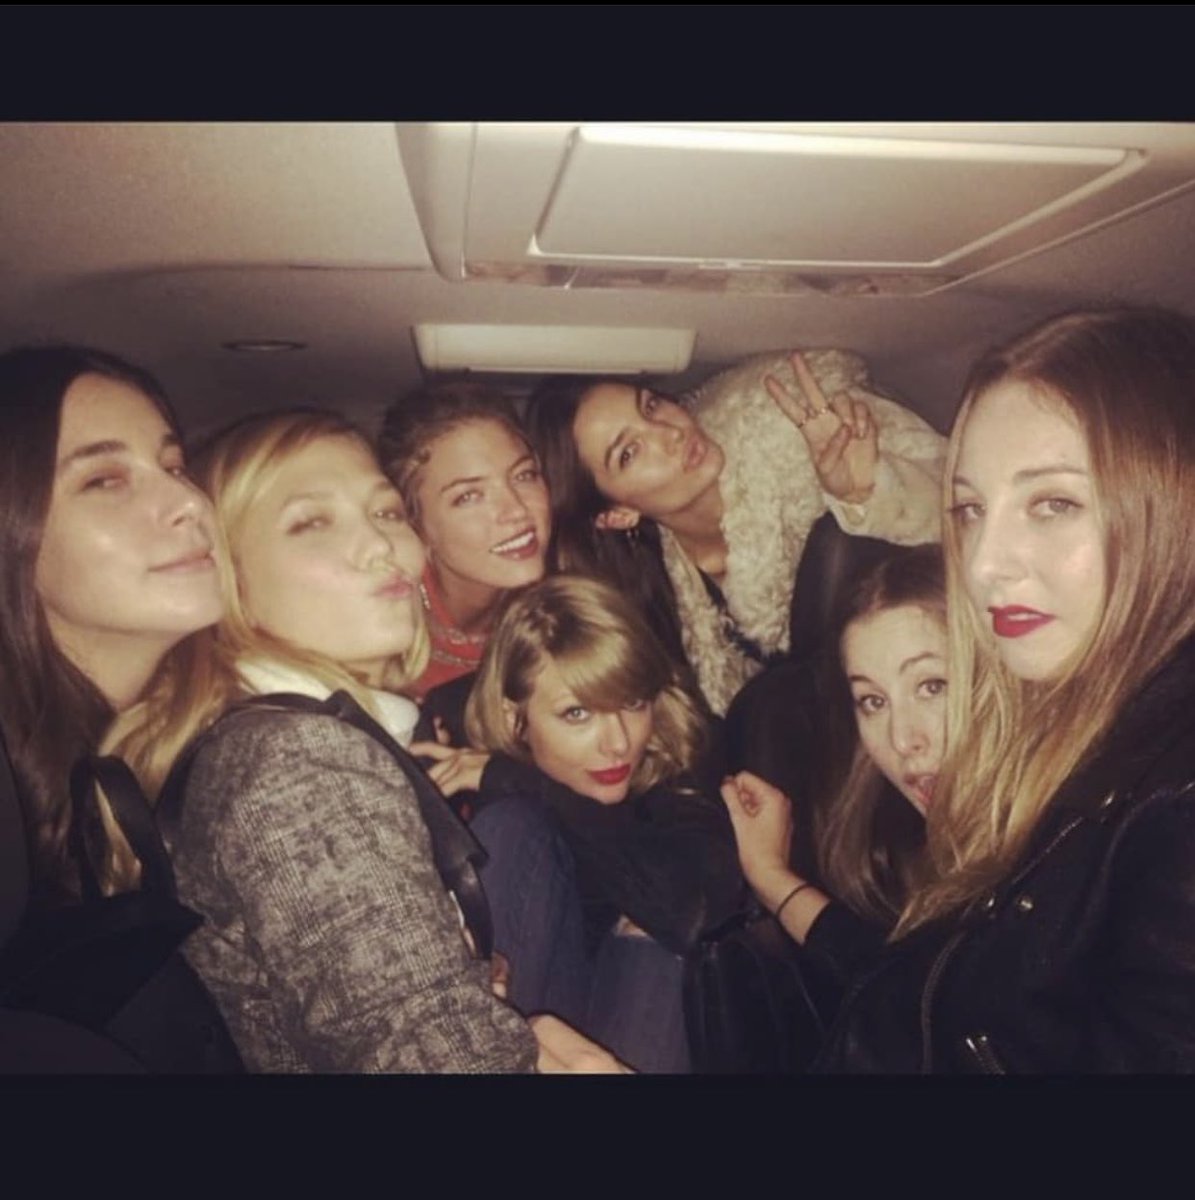 nine years ago today, taylor swift posted a photo from the night before via instagram:

“So proud of these girls, 3 for killing it at the Victoria's Secret Fashion Show (@marthahunt @lilyaldridge @karliekloss) and 3 for their Grammy nomination!!! (@haimtheband)”

december 5, 2014